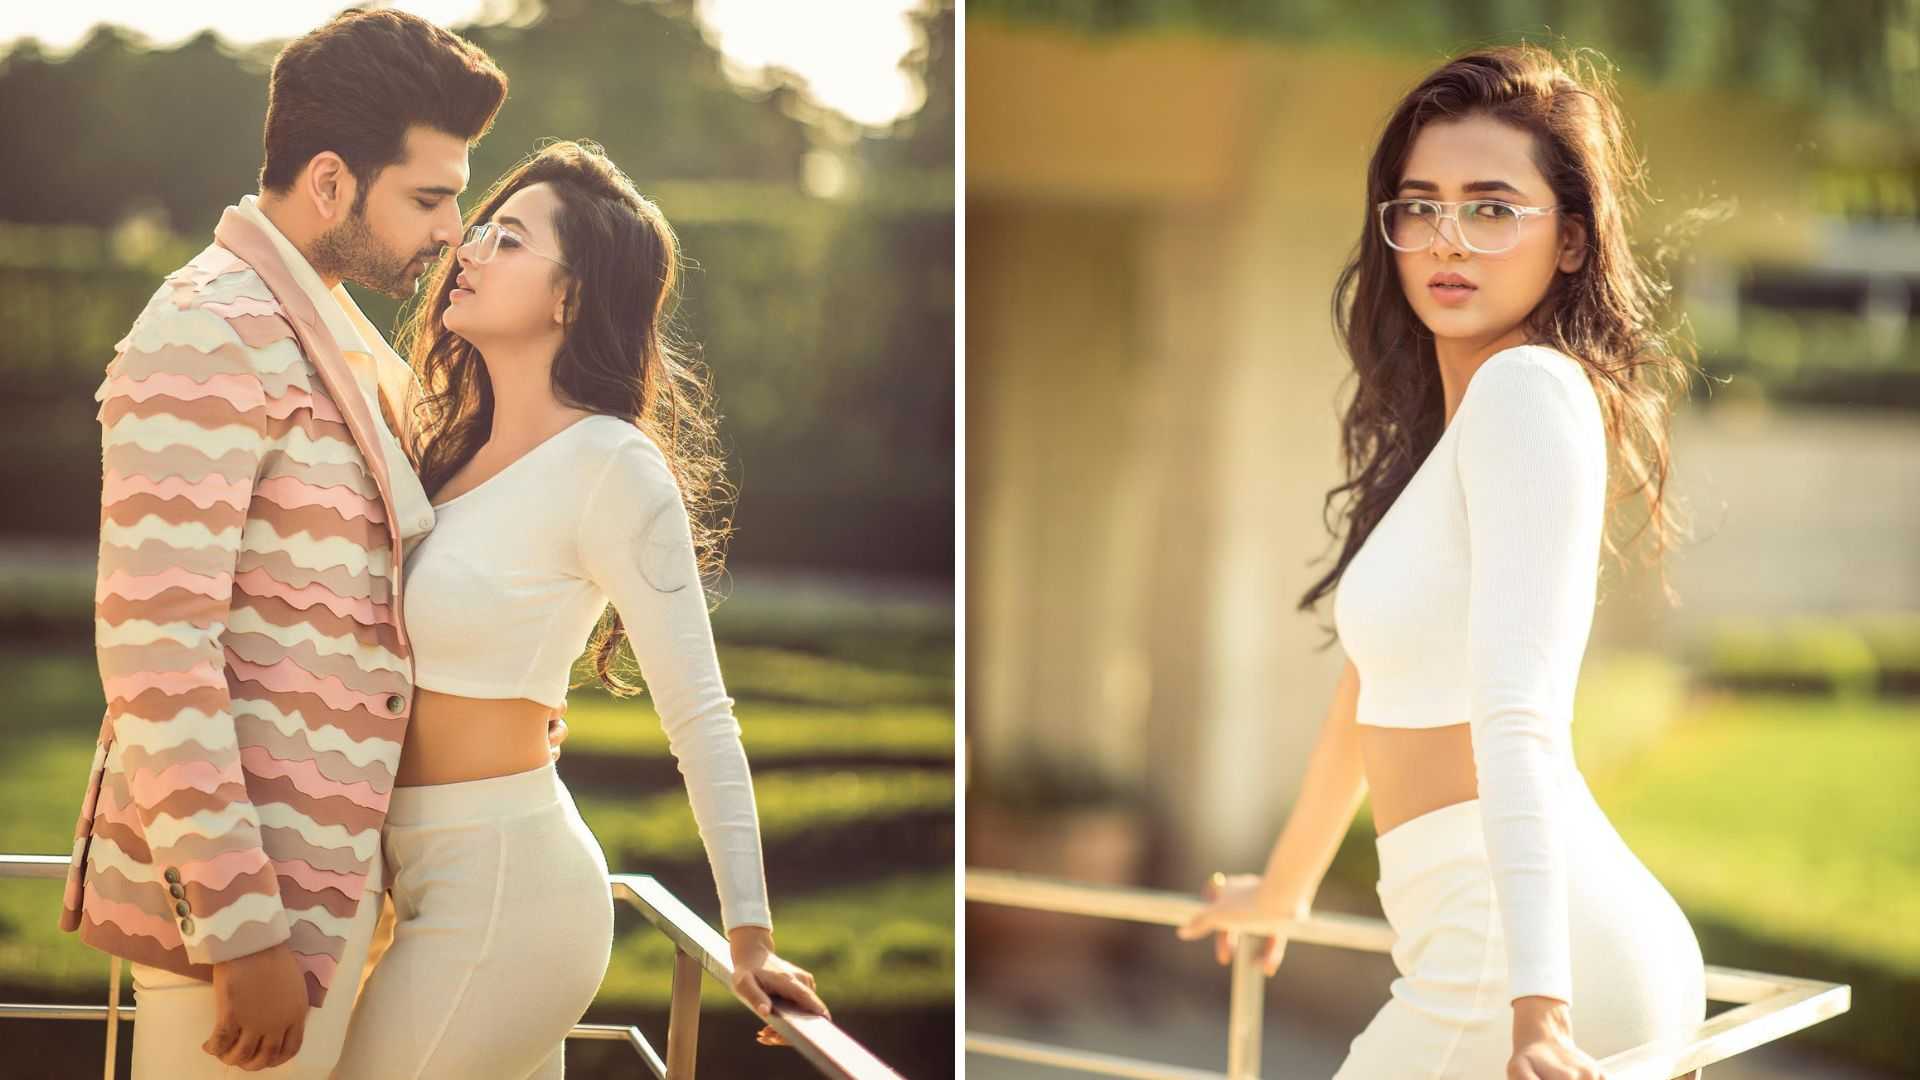 'Aag Aag Aag' : Tejasswi Prakash and Karan Kundrra will melt your TejRan hearts in these stunning pictures 